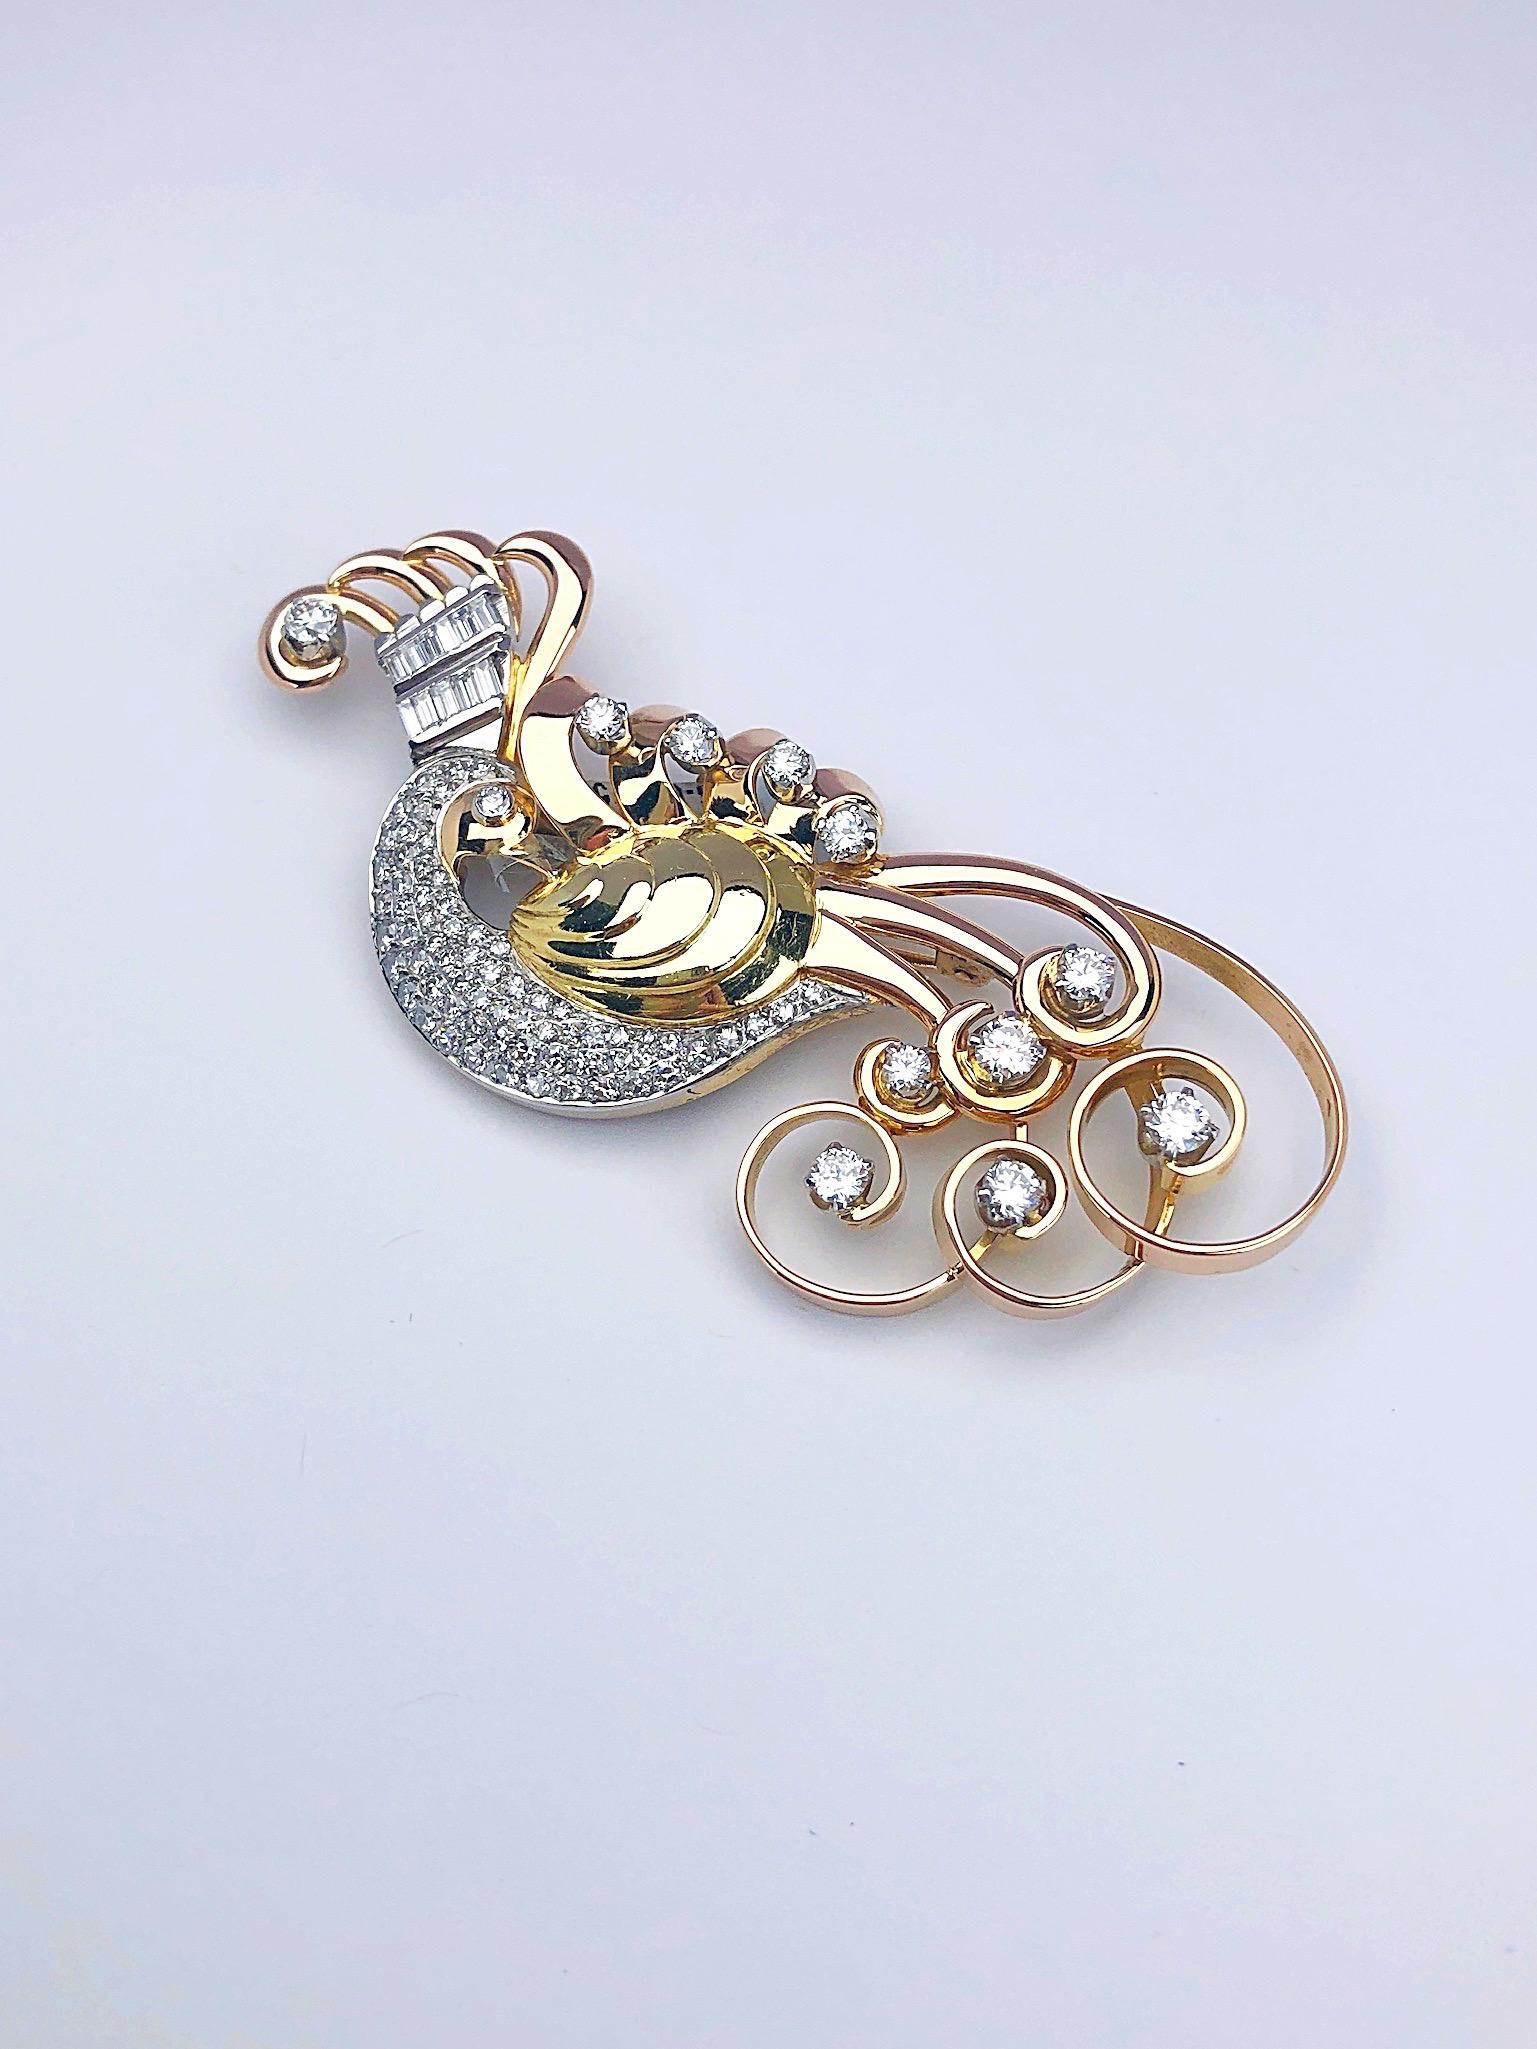 Circa 1940's retro brooch. An artistically designed peacock . His yellow gold body is set with diamond pave, his rose gold tail feathers are set with brilliant cut diamonds and his crown is set with baguette cut diamonds. 3